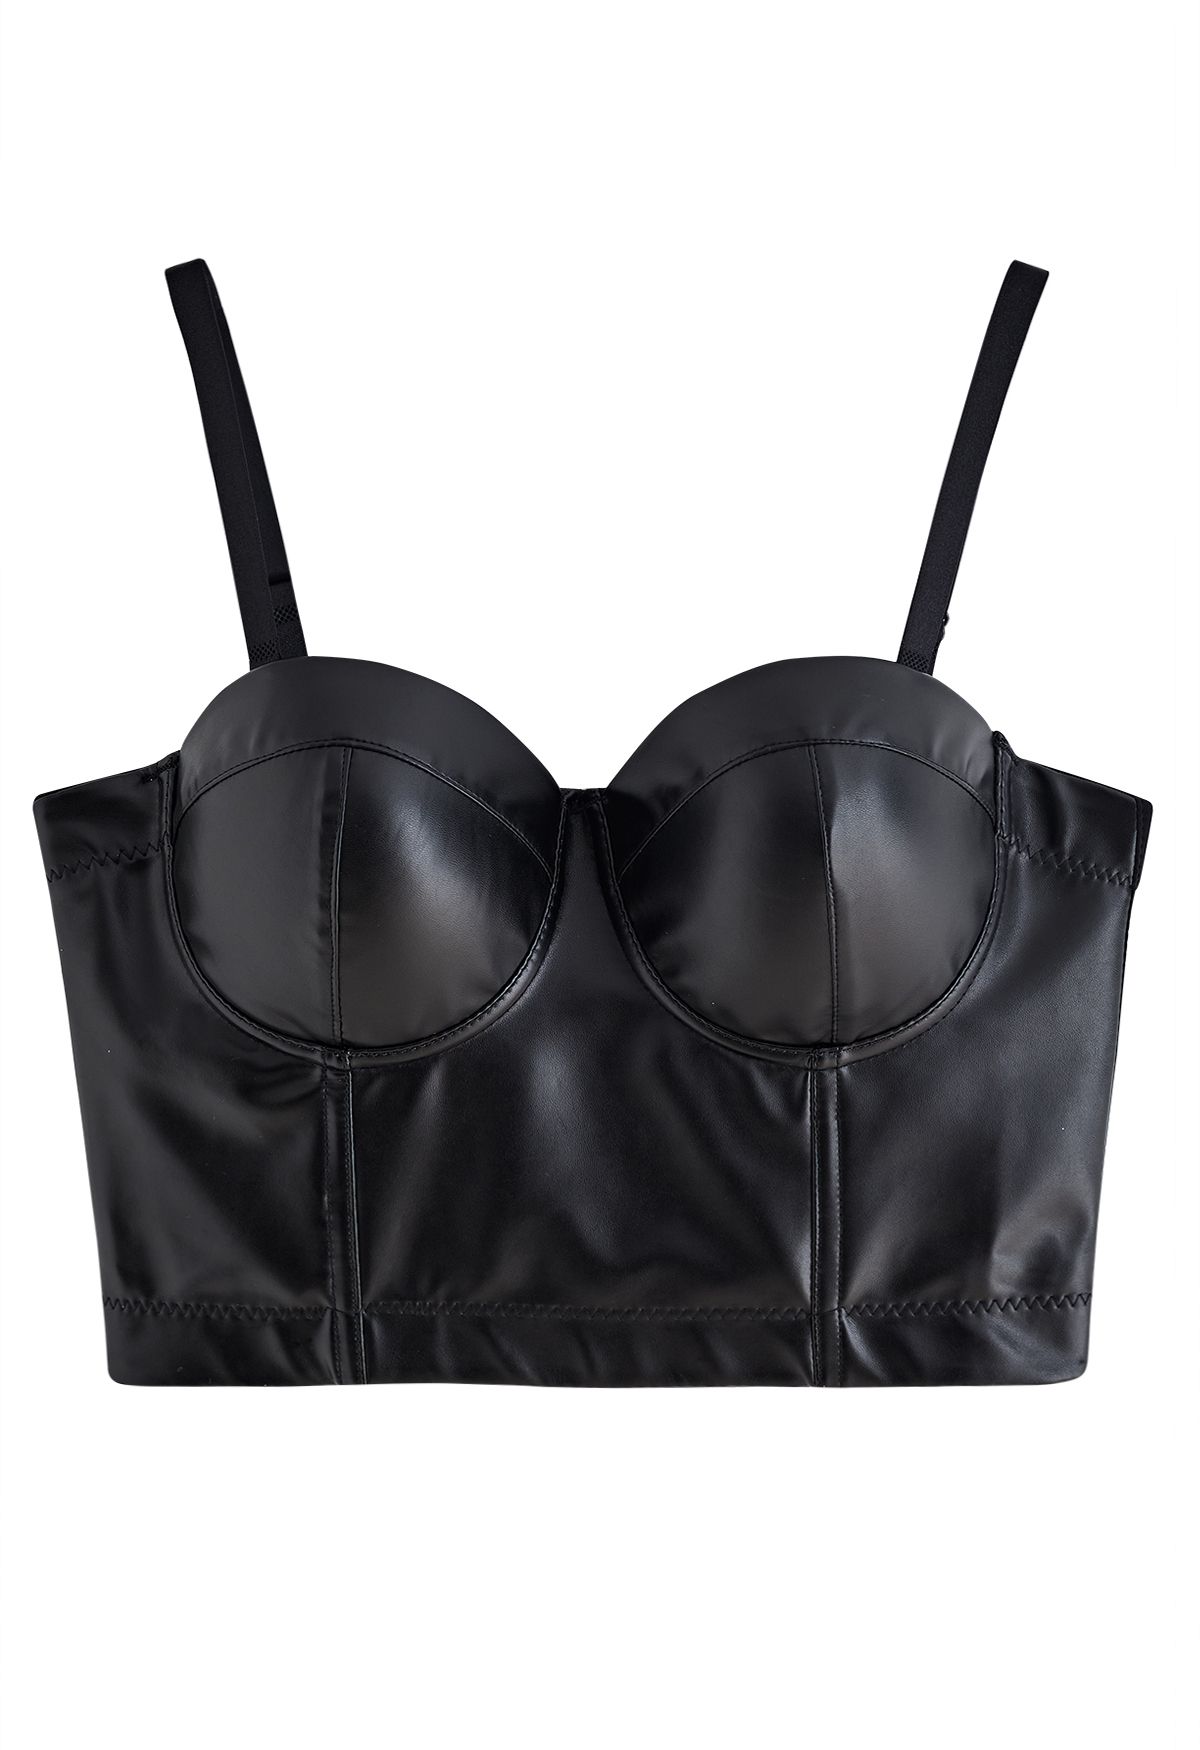 Faux Leather Bustier Crop Top in Black - Retro, Indie Fashion